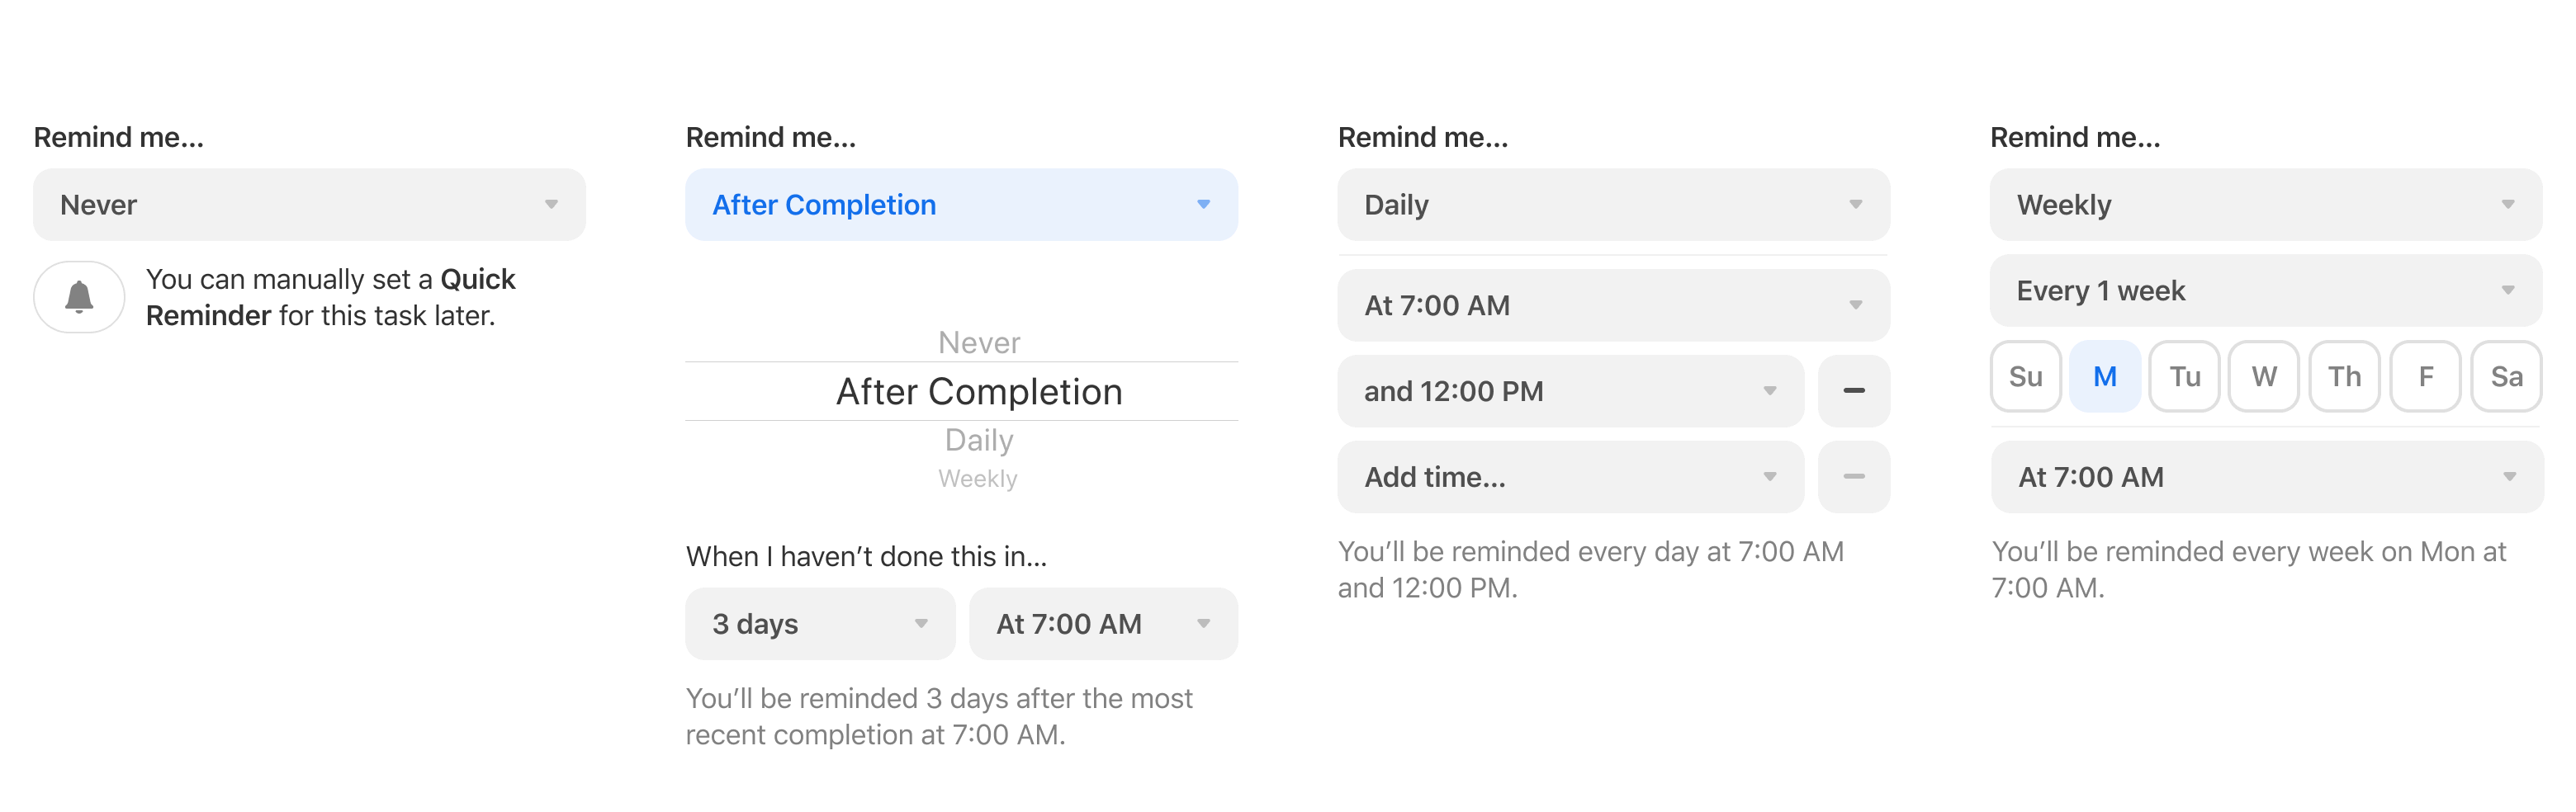 4 states of the auto reminders settings shown under the captions: never, periodically, daily, and weekly